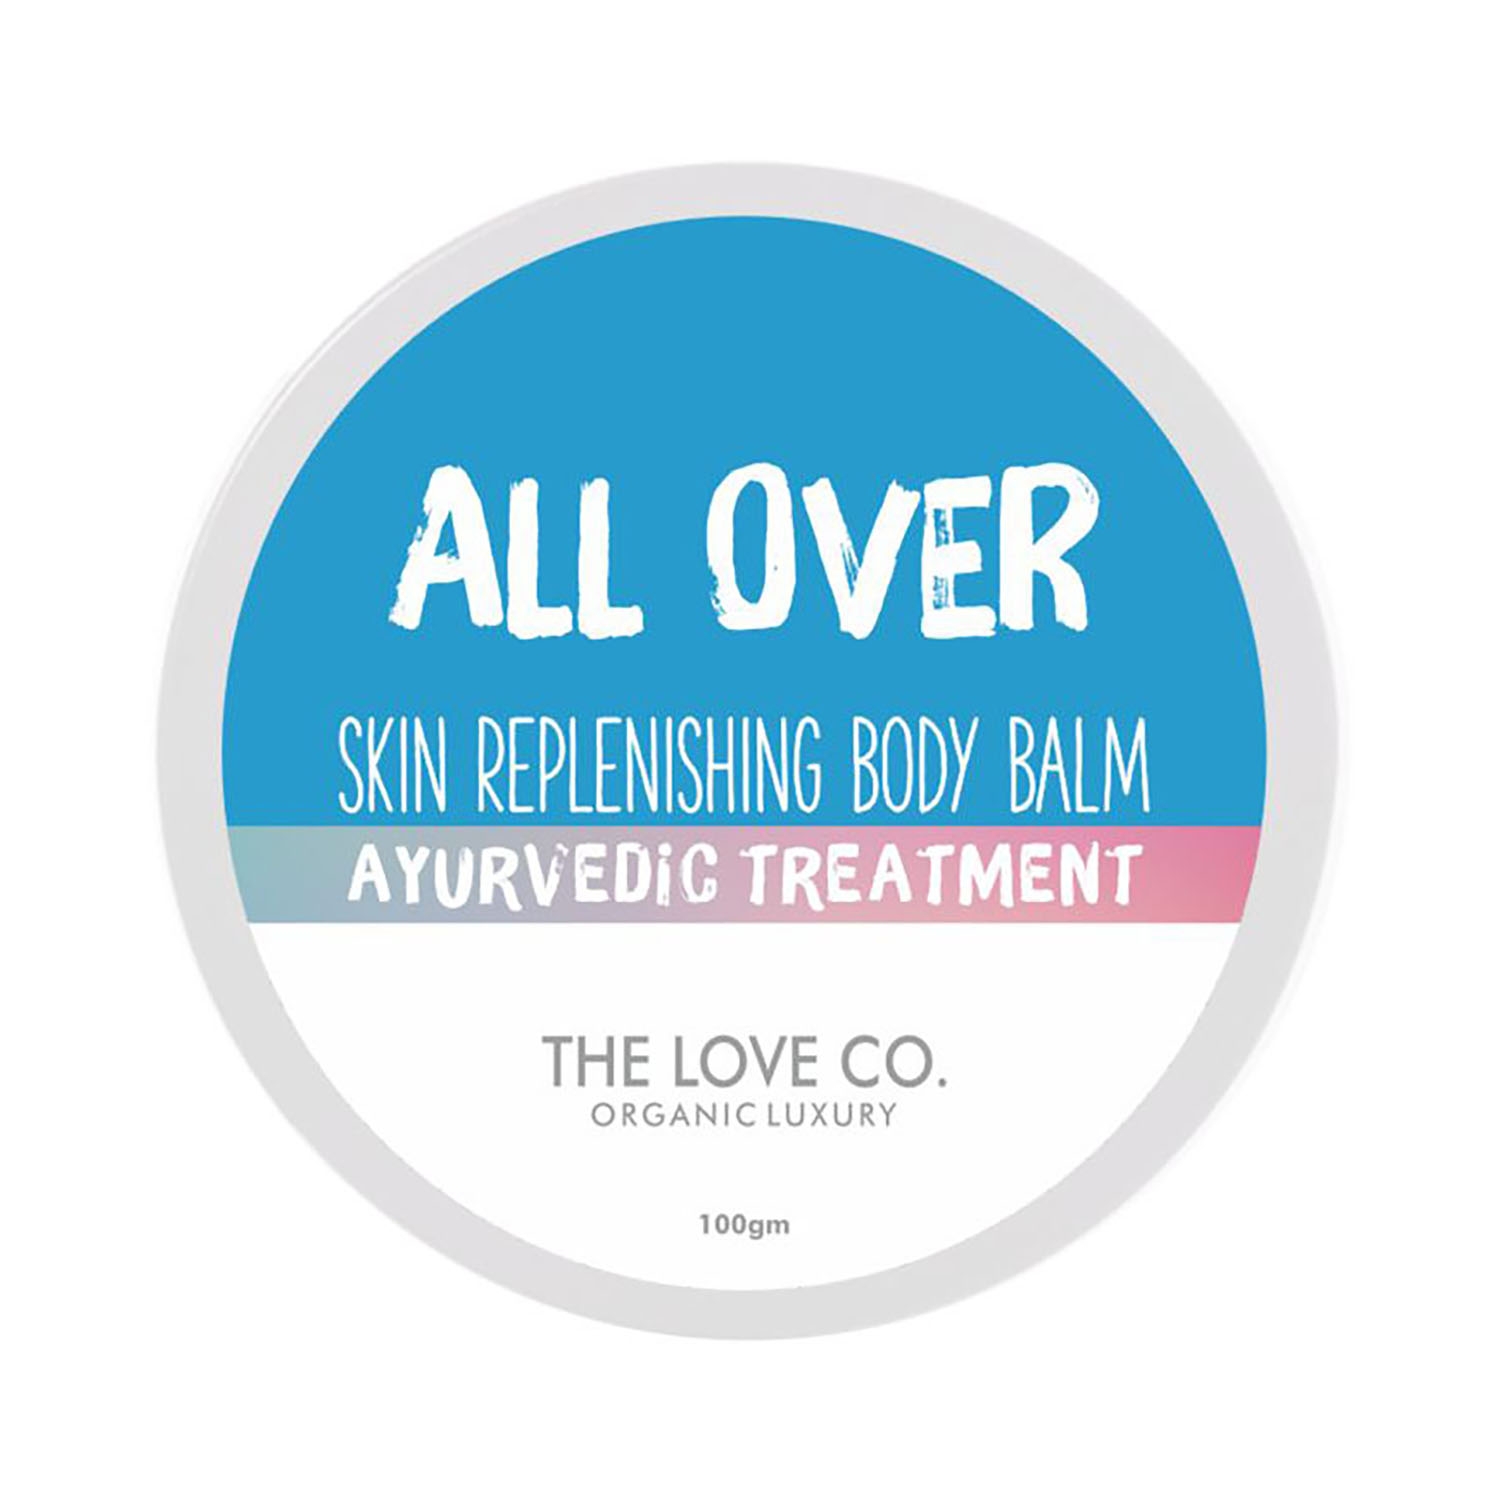 THE LOVE CO. | THE LOVE CO. All Over Skin Replenishing Body Balm (100g)